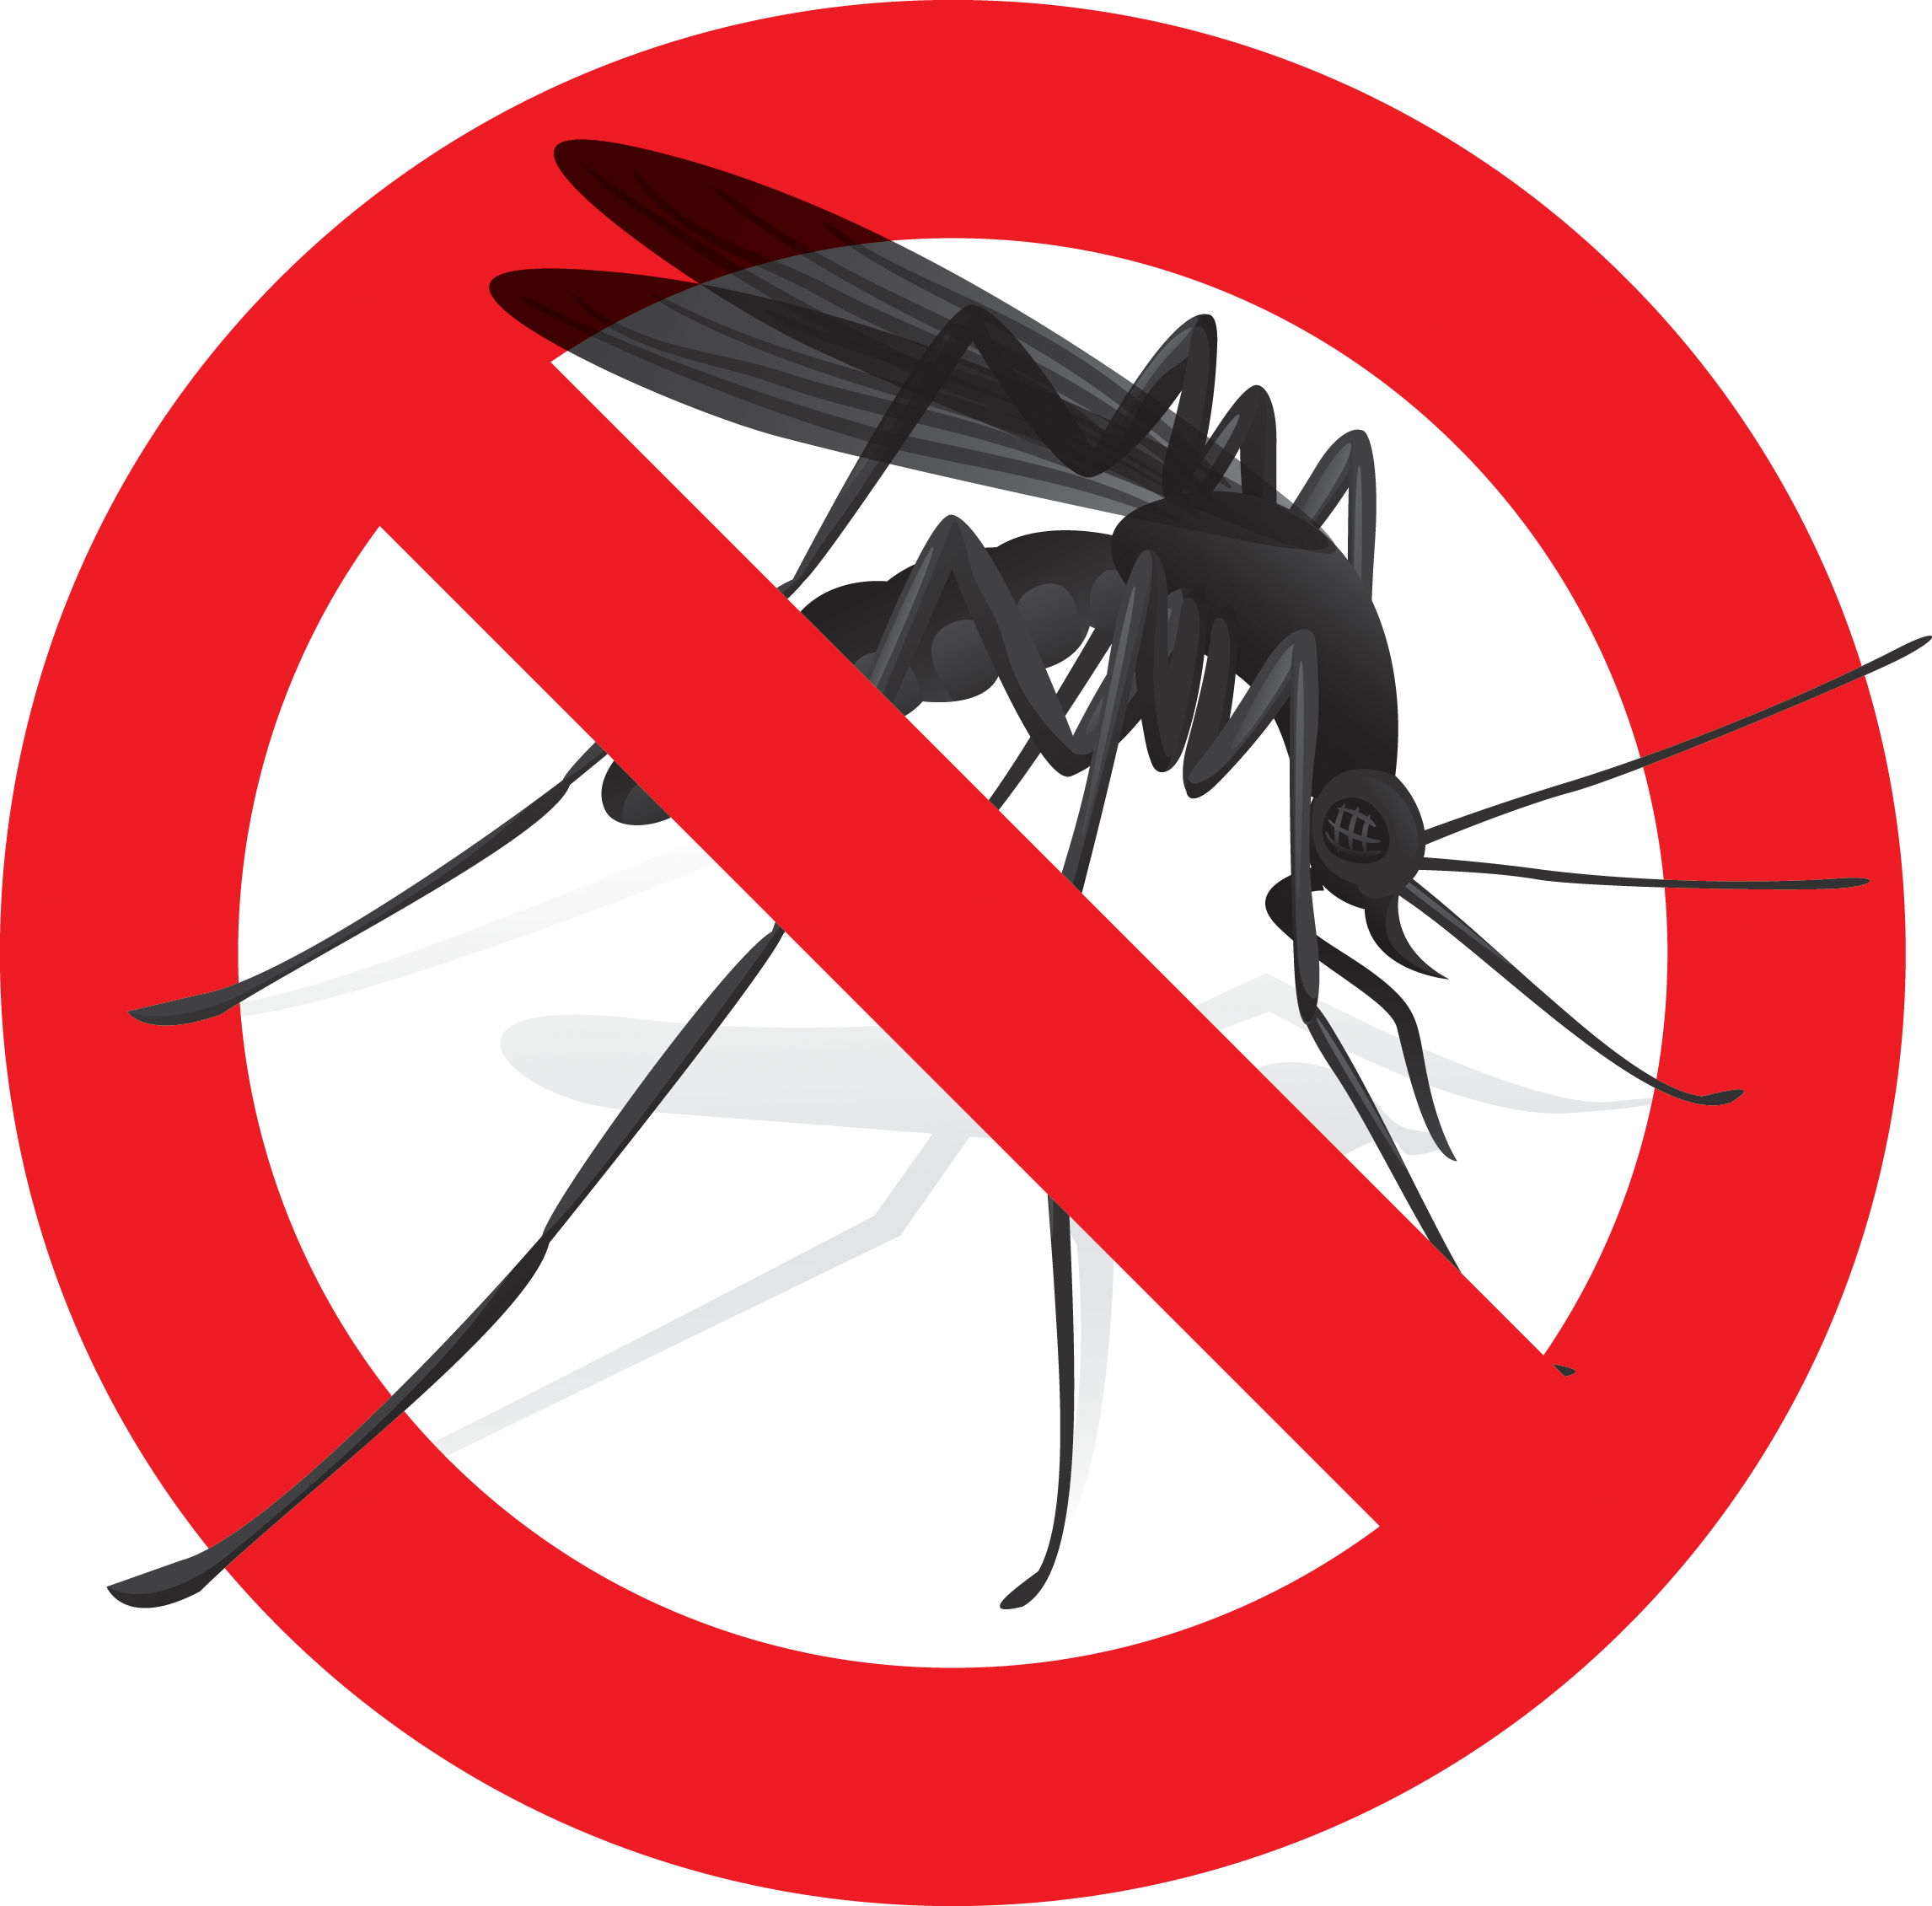 Will protection from mosquitoes. Mosquito clipart harm